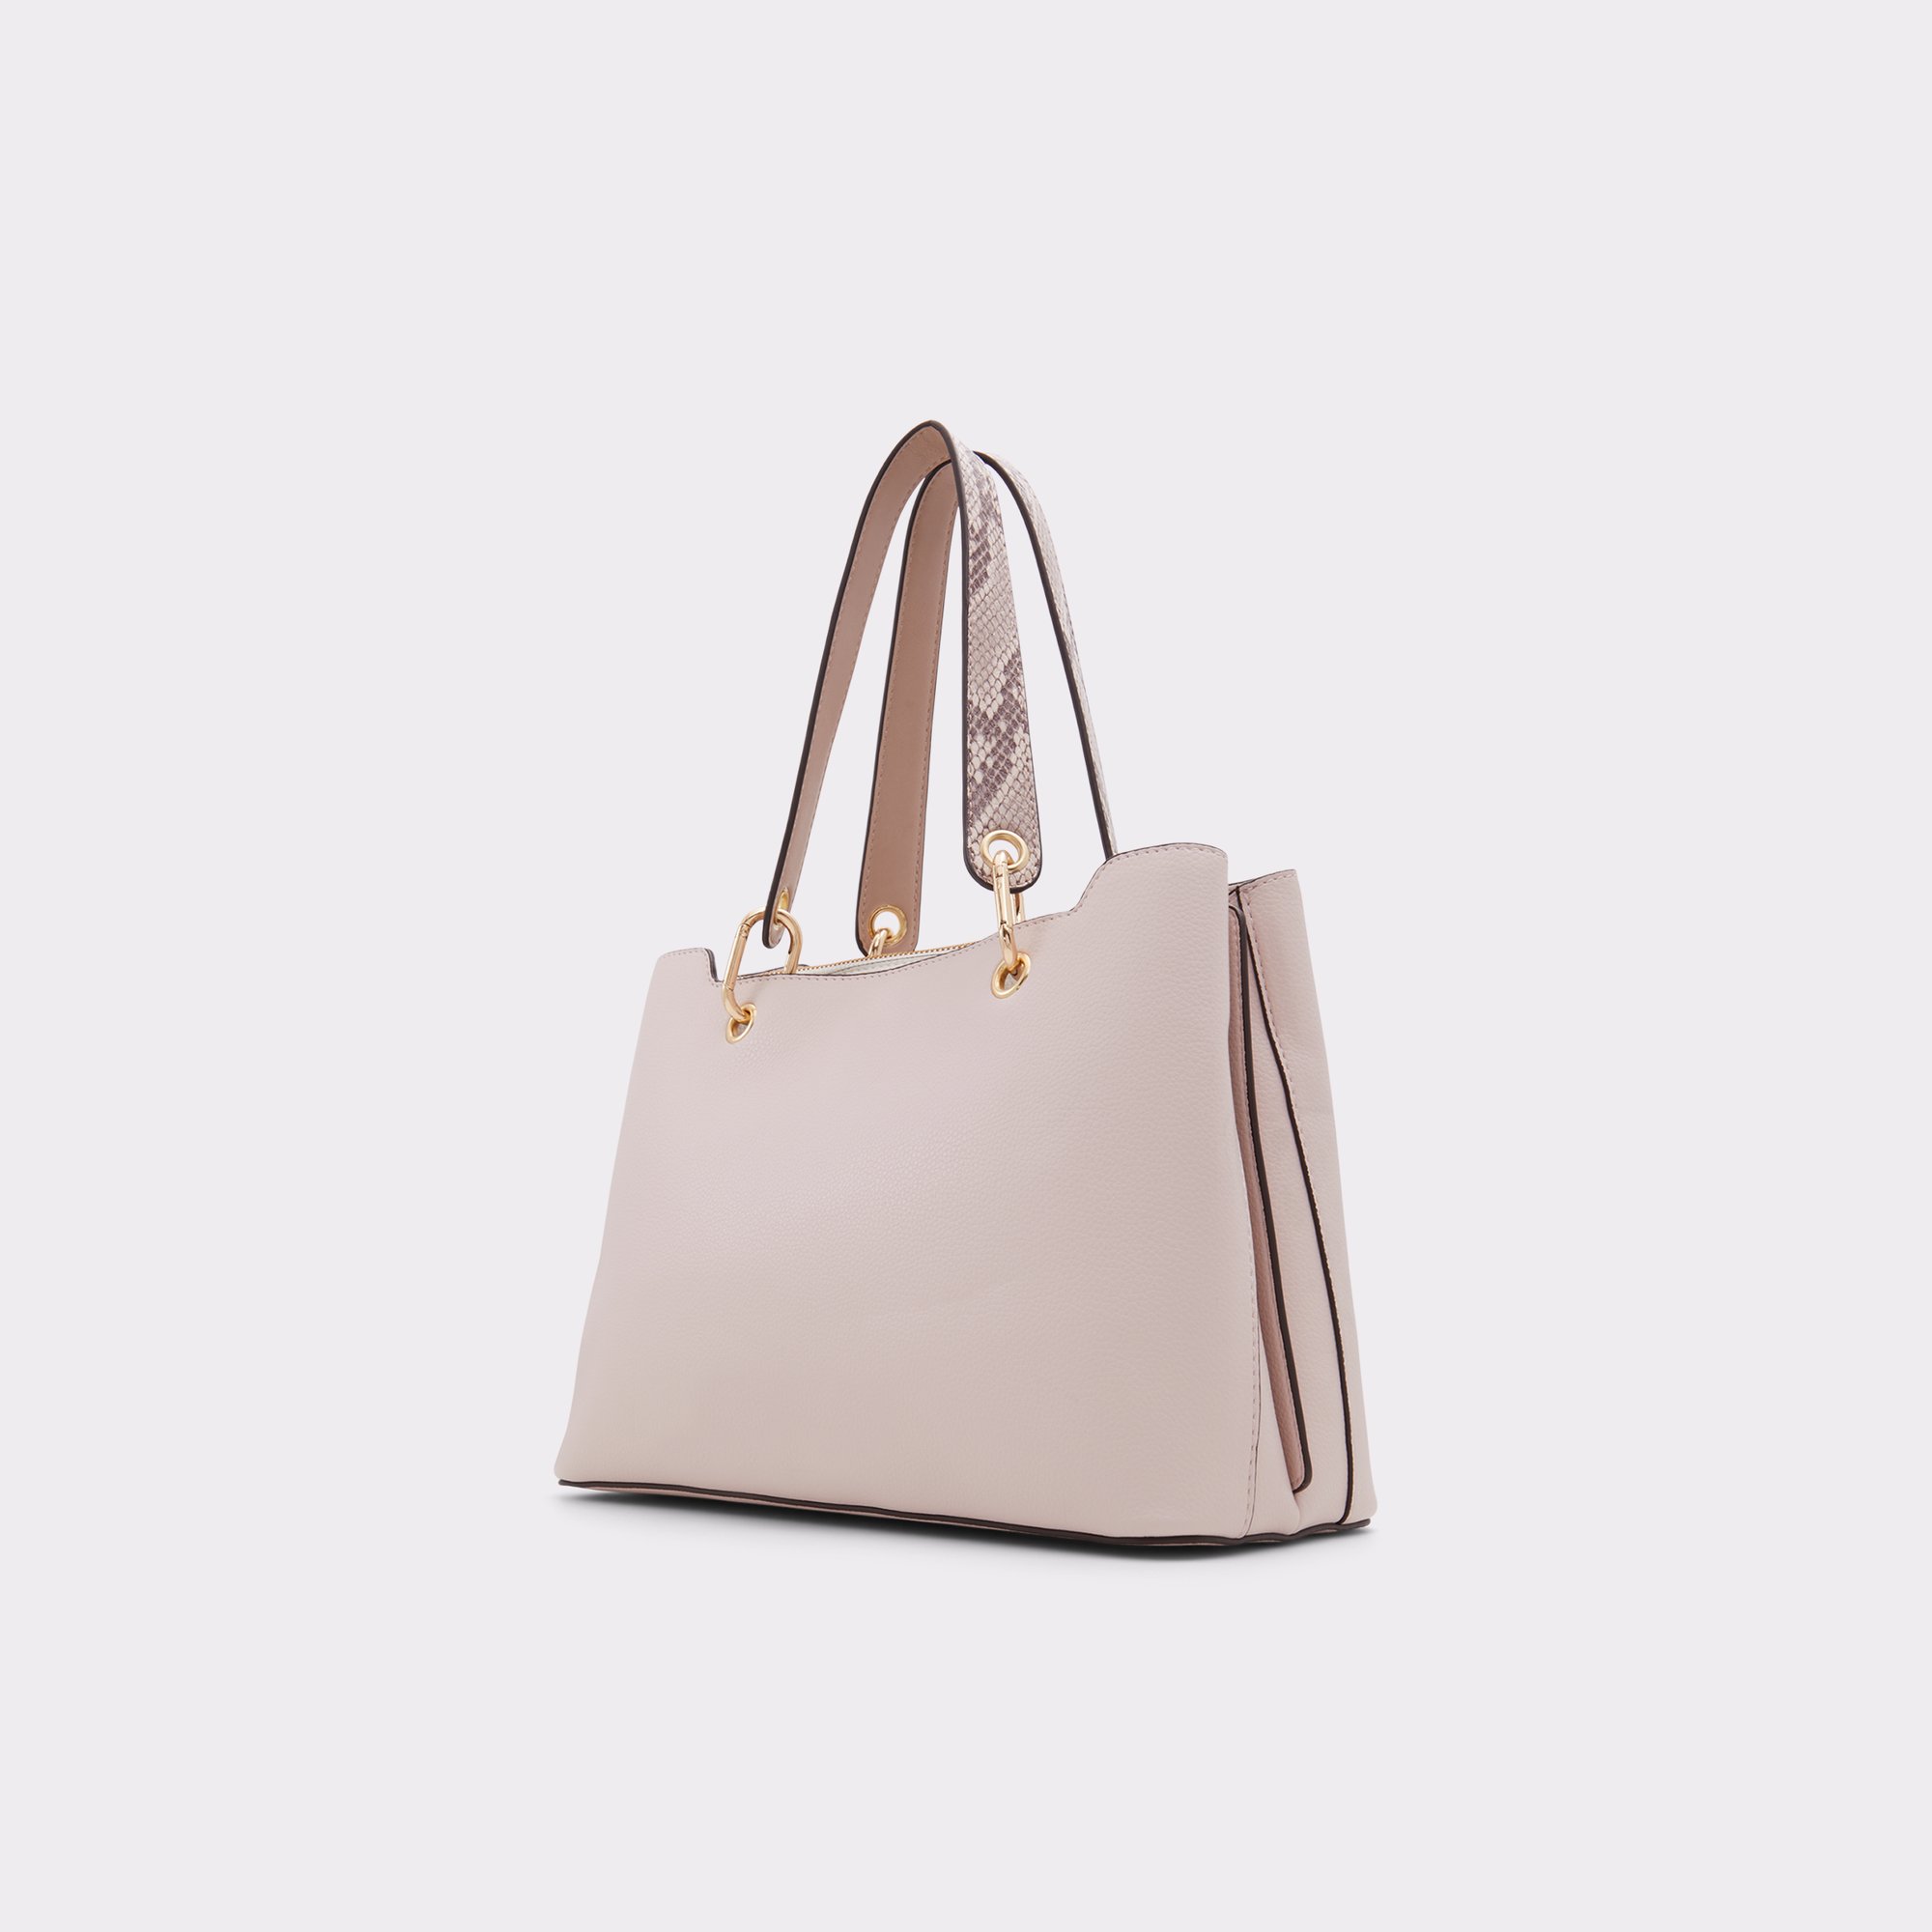 Shop Aldo Bags For Women Original Sale with great discounts and